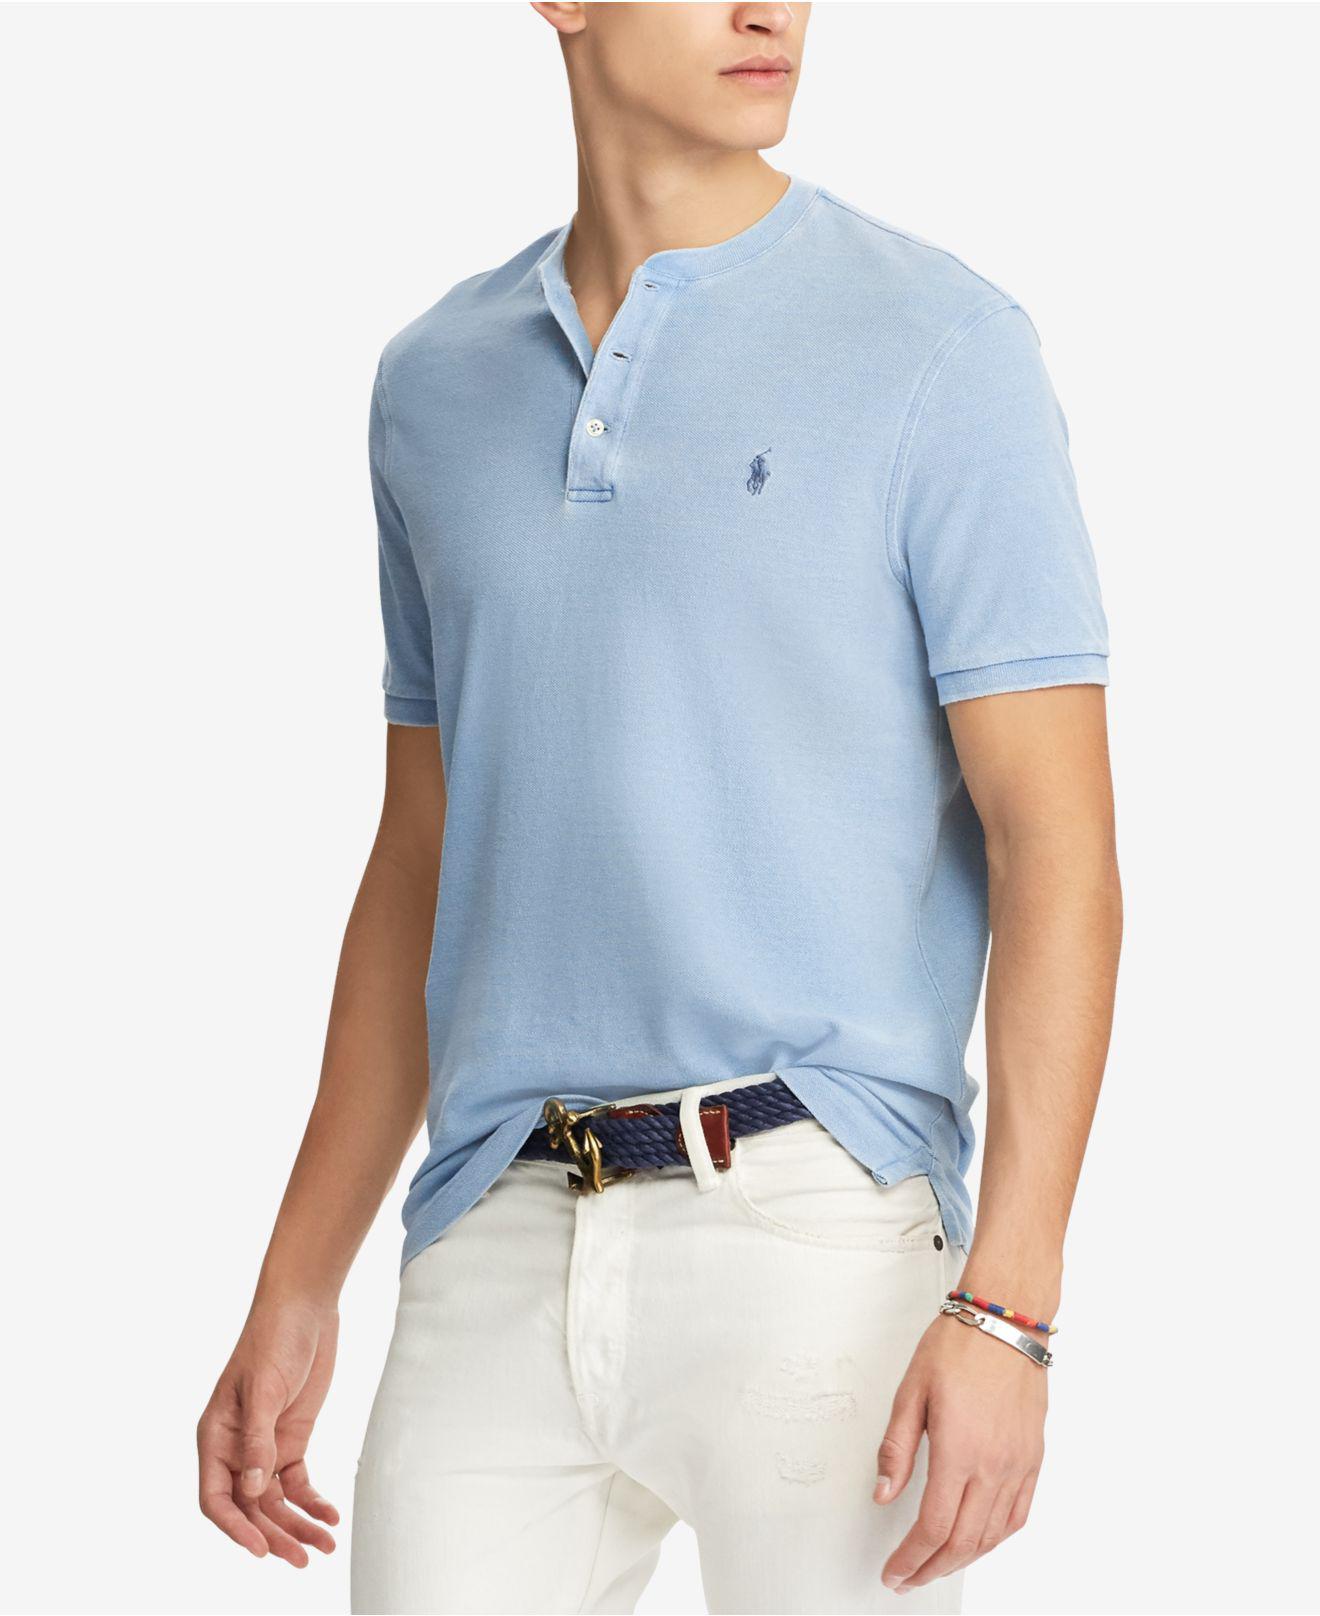 polo ralph lauren t shirts macy's > Up to 72% OFF > Free shipping